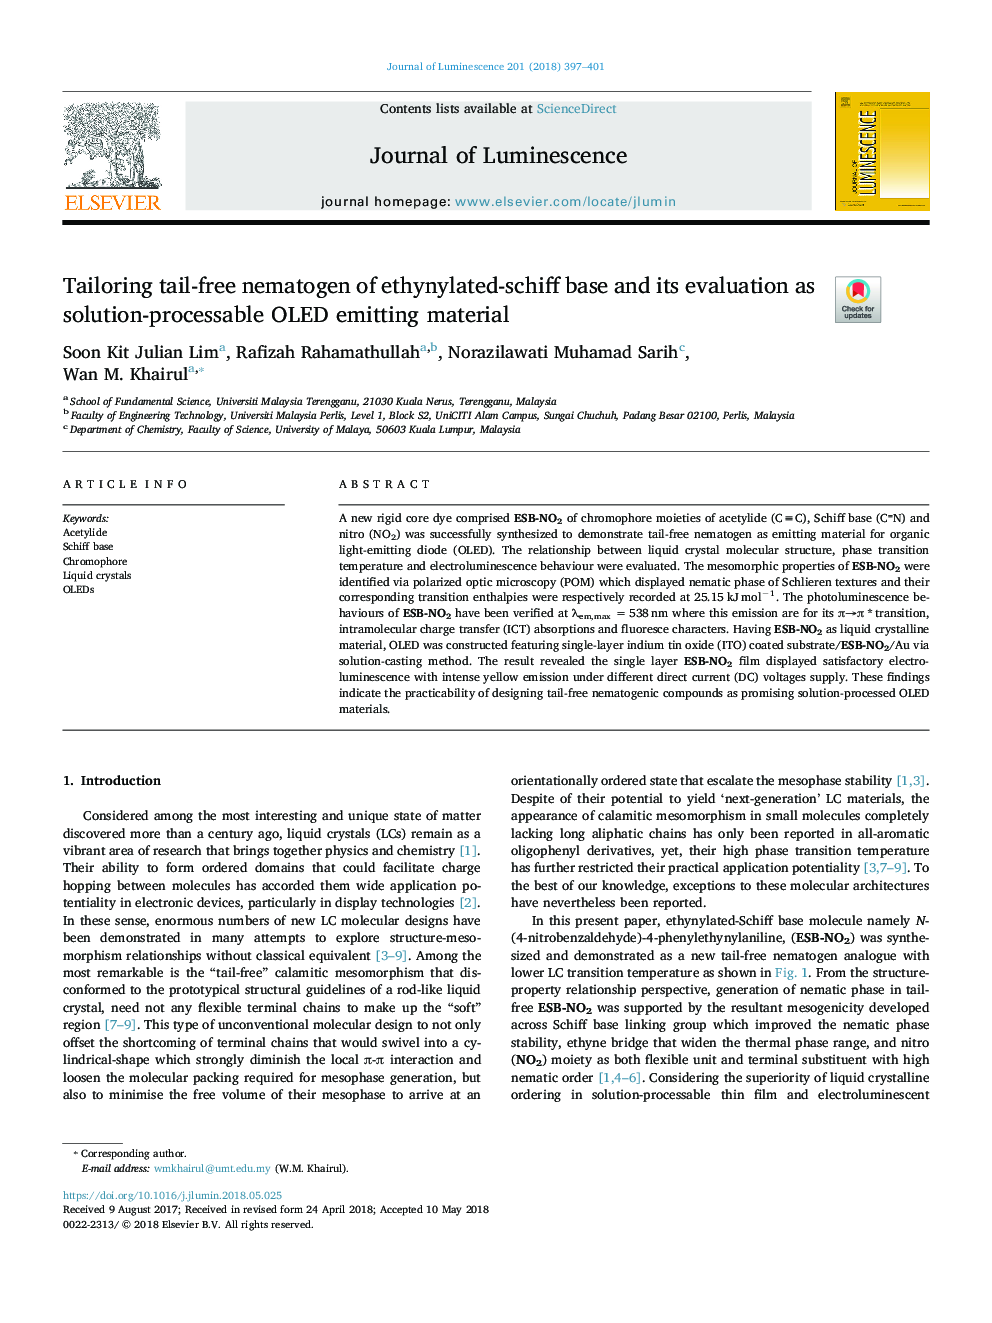 Tailoring tail-free nematogen of ethynylated-schiff base and its evaluation as solution-processable OLED emitting material